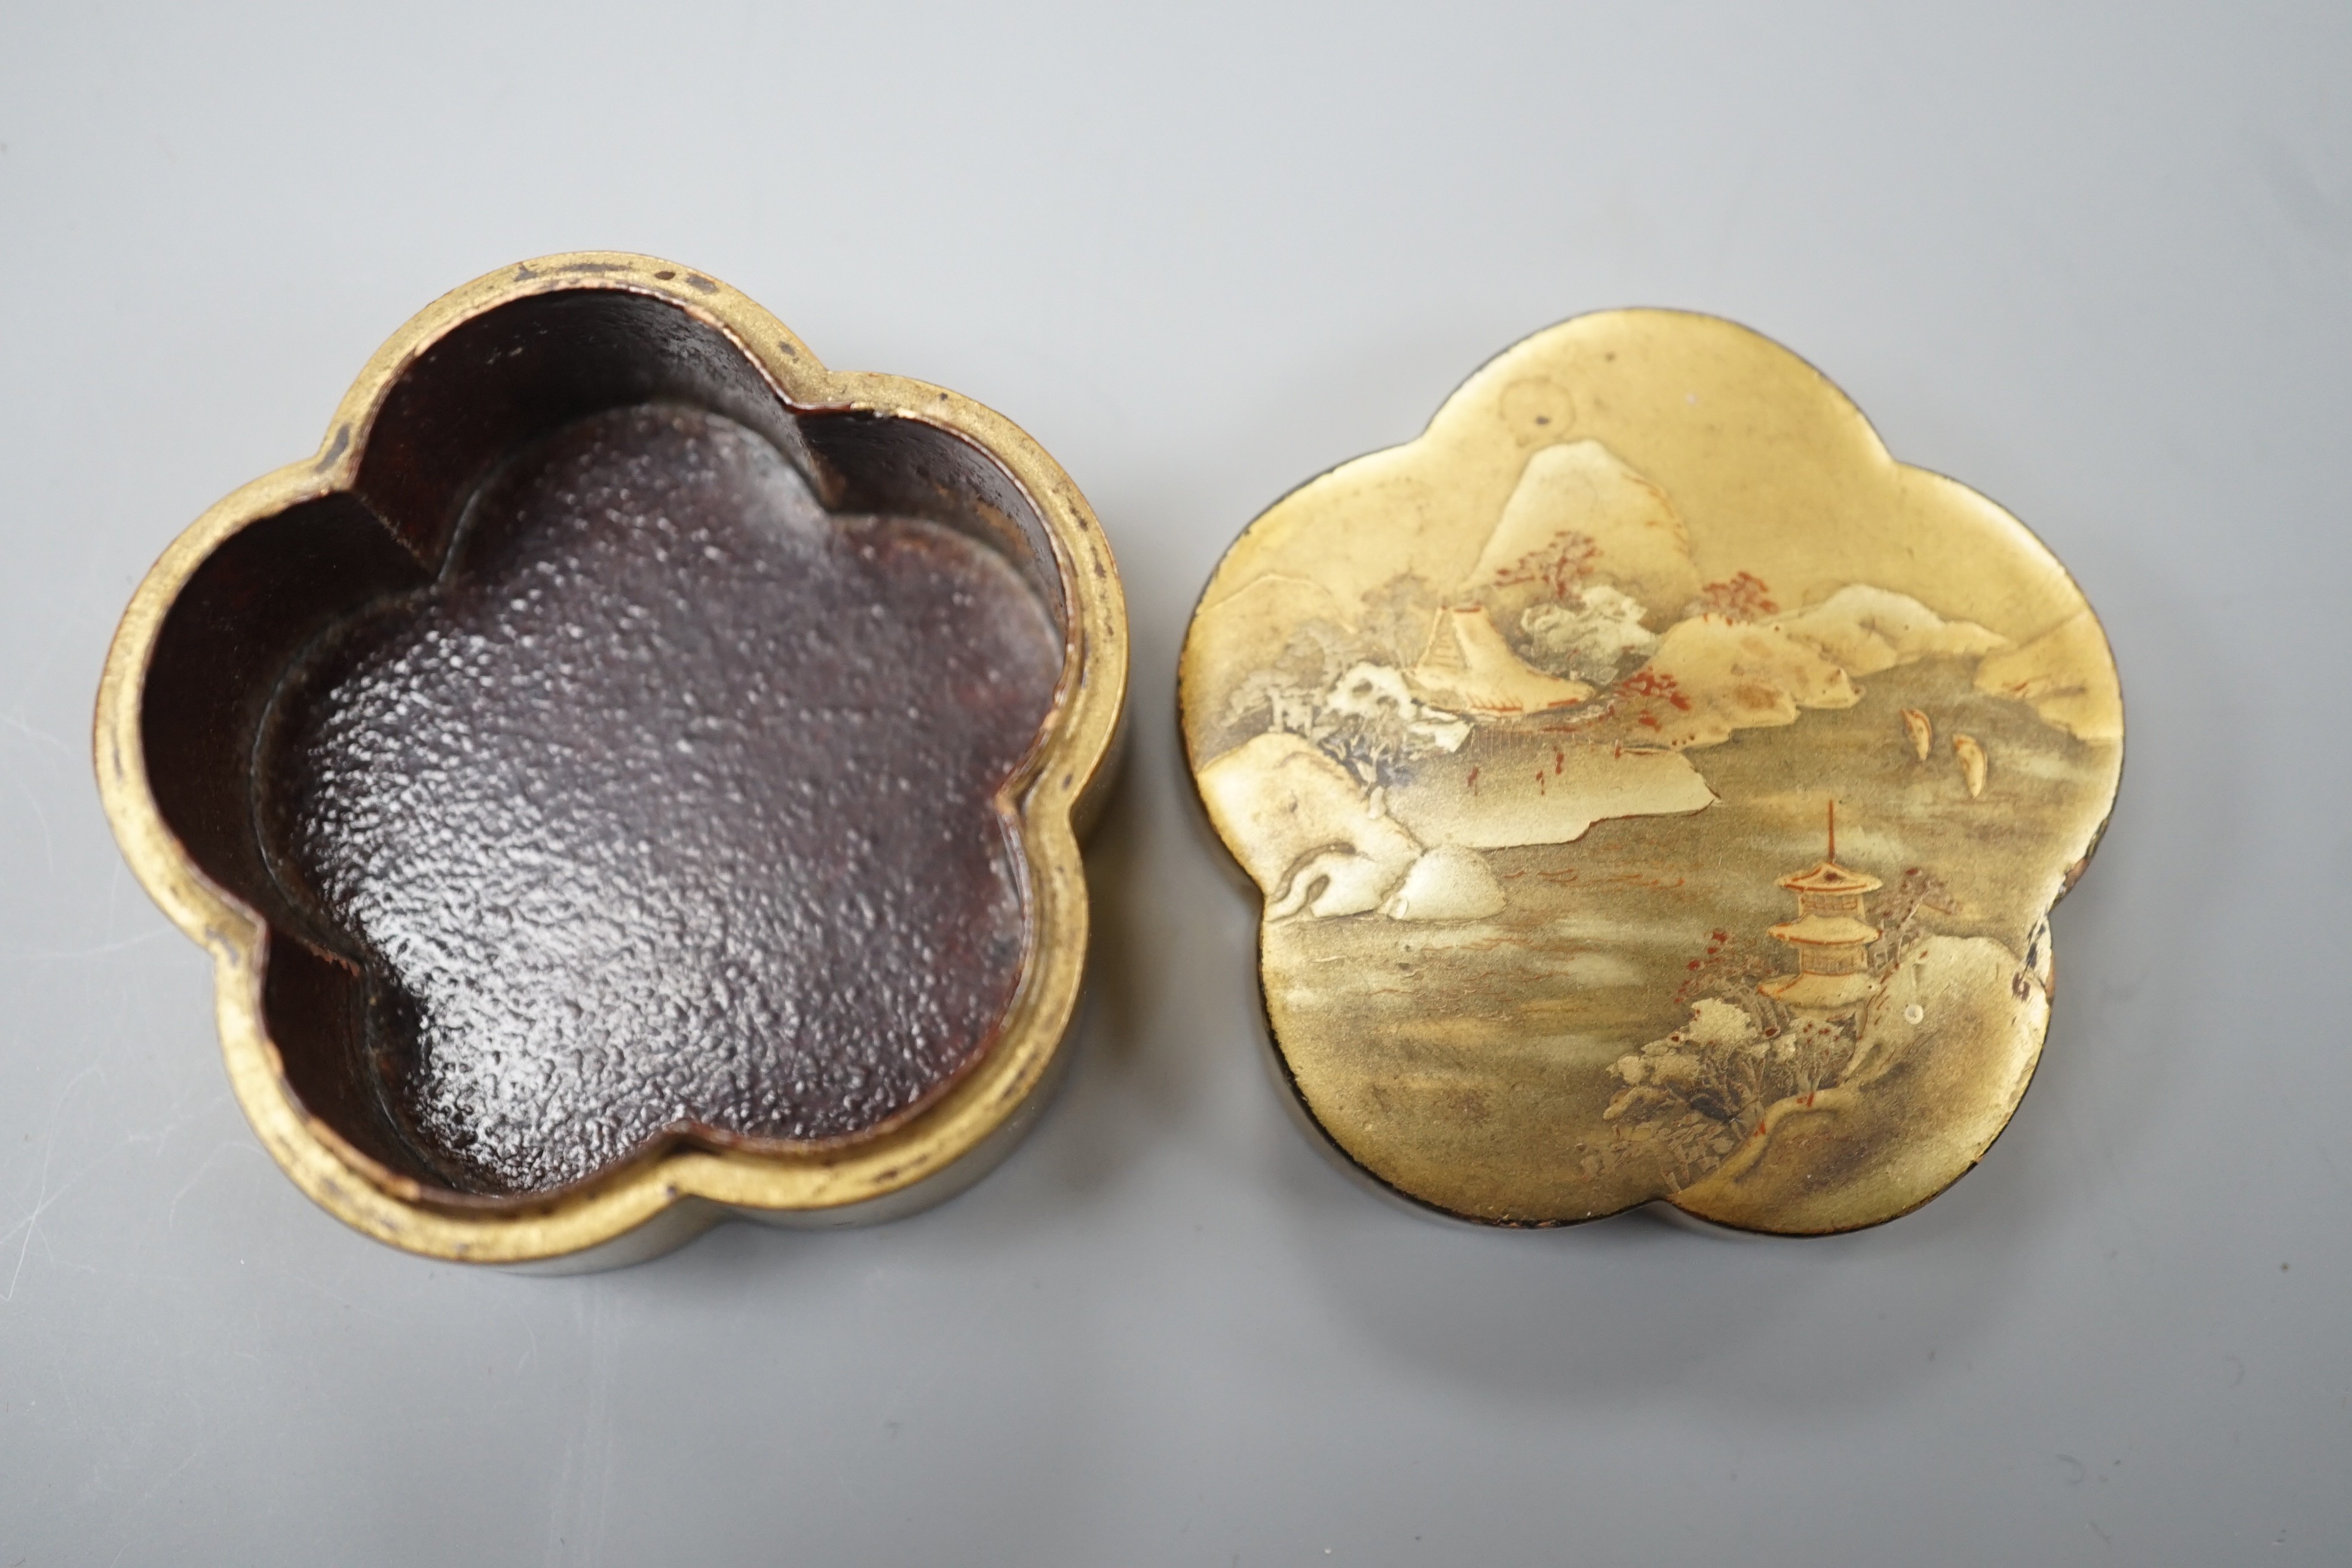 Two Japanese lacquer boxes, an ivory and bronze manju, an ivory ‘lion’ two-piece belt buckle and two simulated ivory items, late 19th/early 20th century, largest Box 11.5 cm